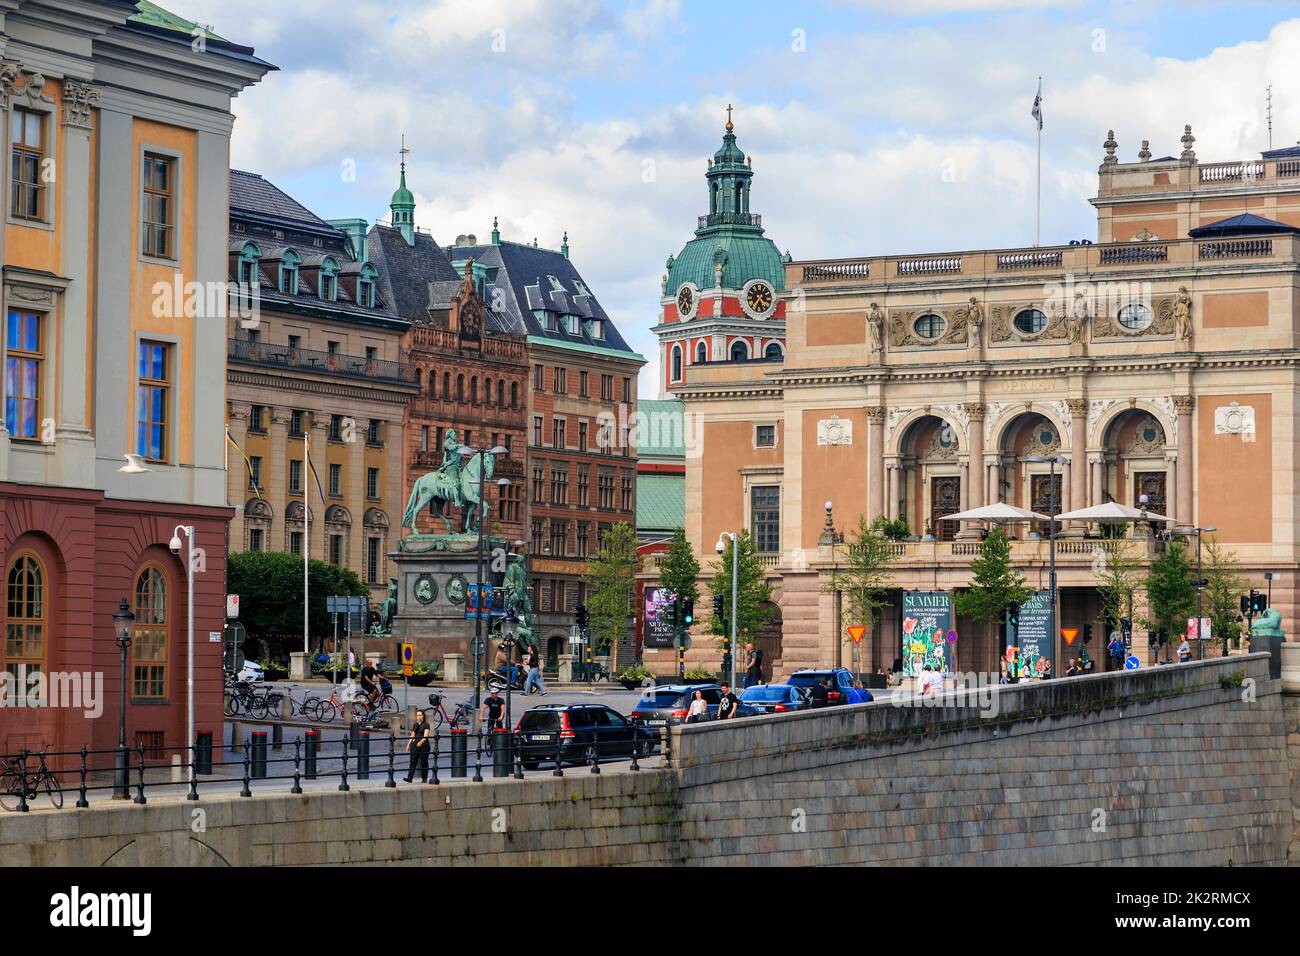 STOCKHOLM, SWEDEN - JUNE 27, 2016: This is Gustav Adolf's Square, one of the central squares of the city. Stock Photo